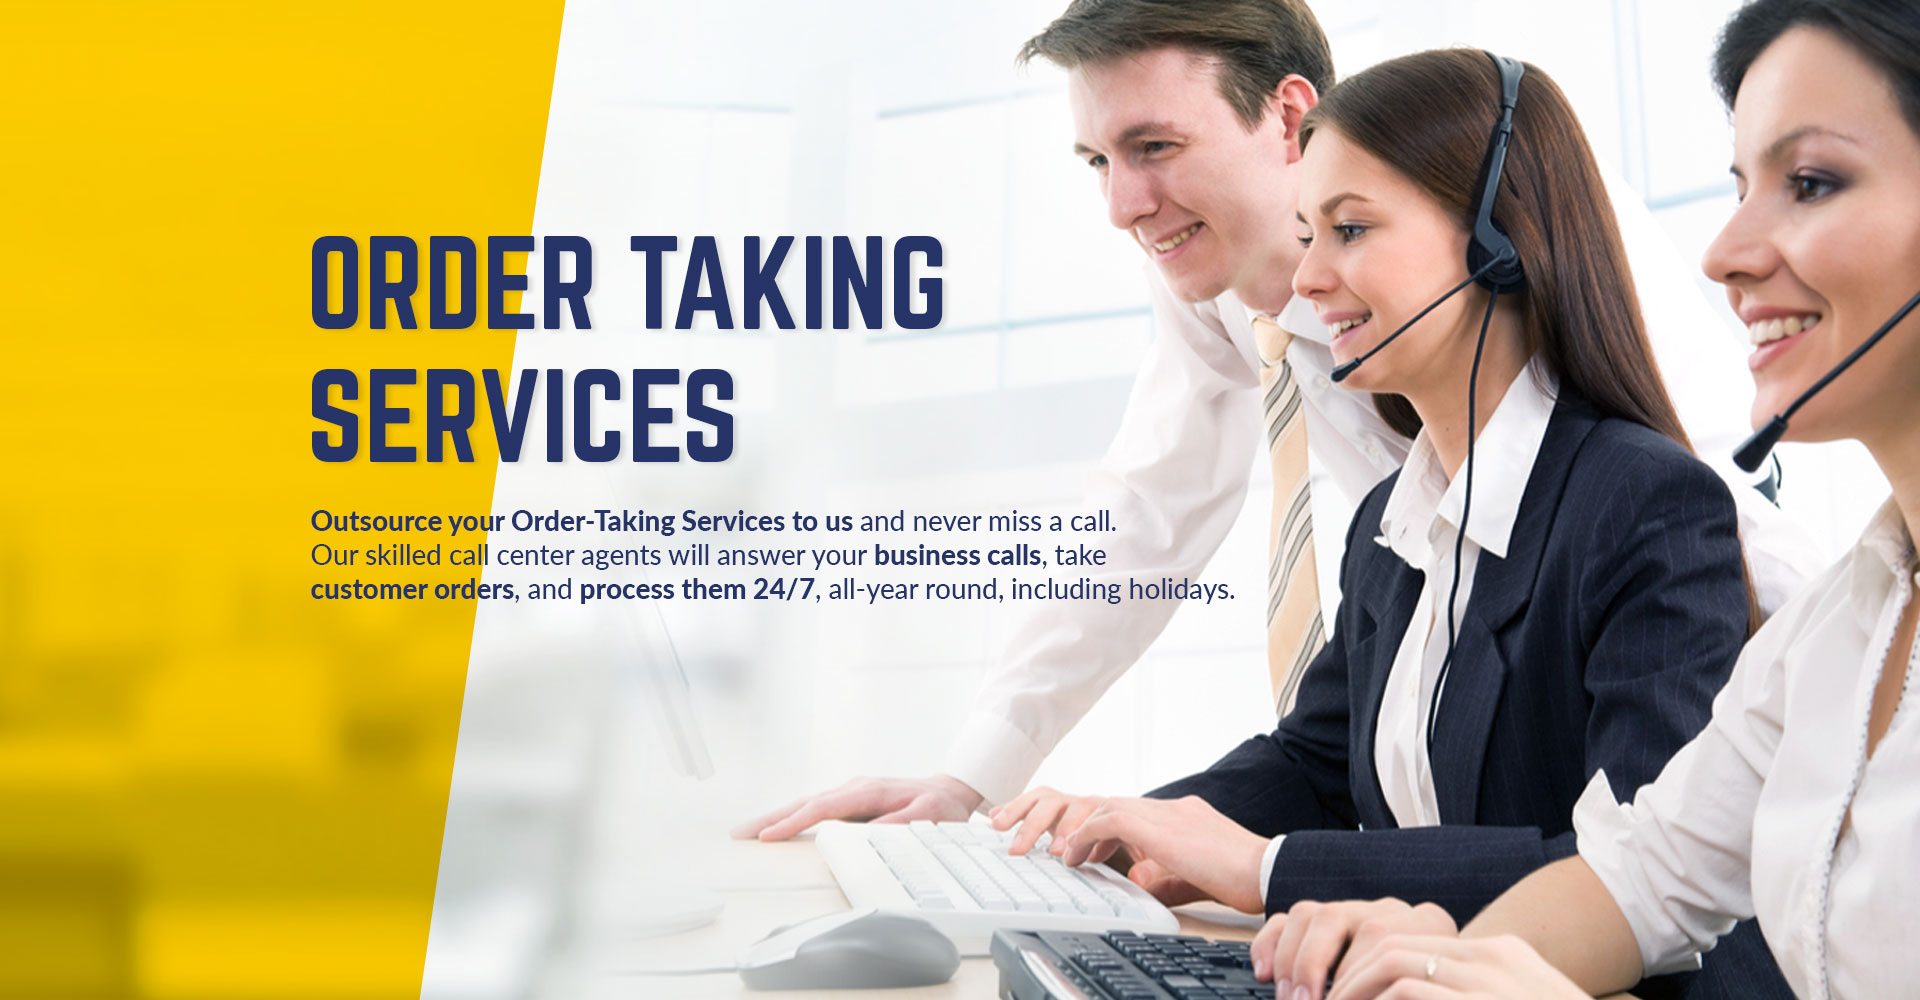 Order Taking Services Call Center